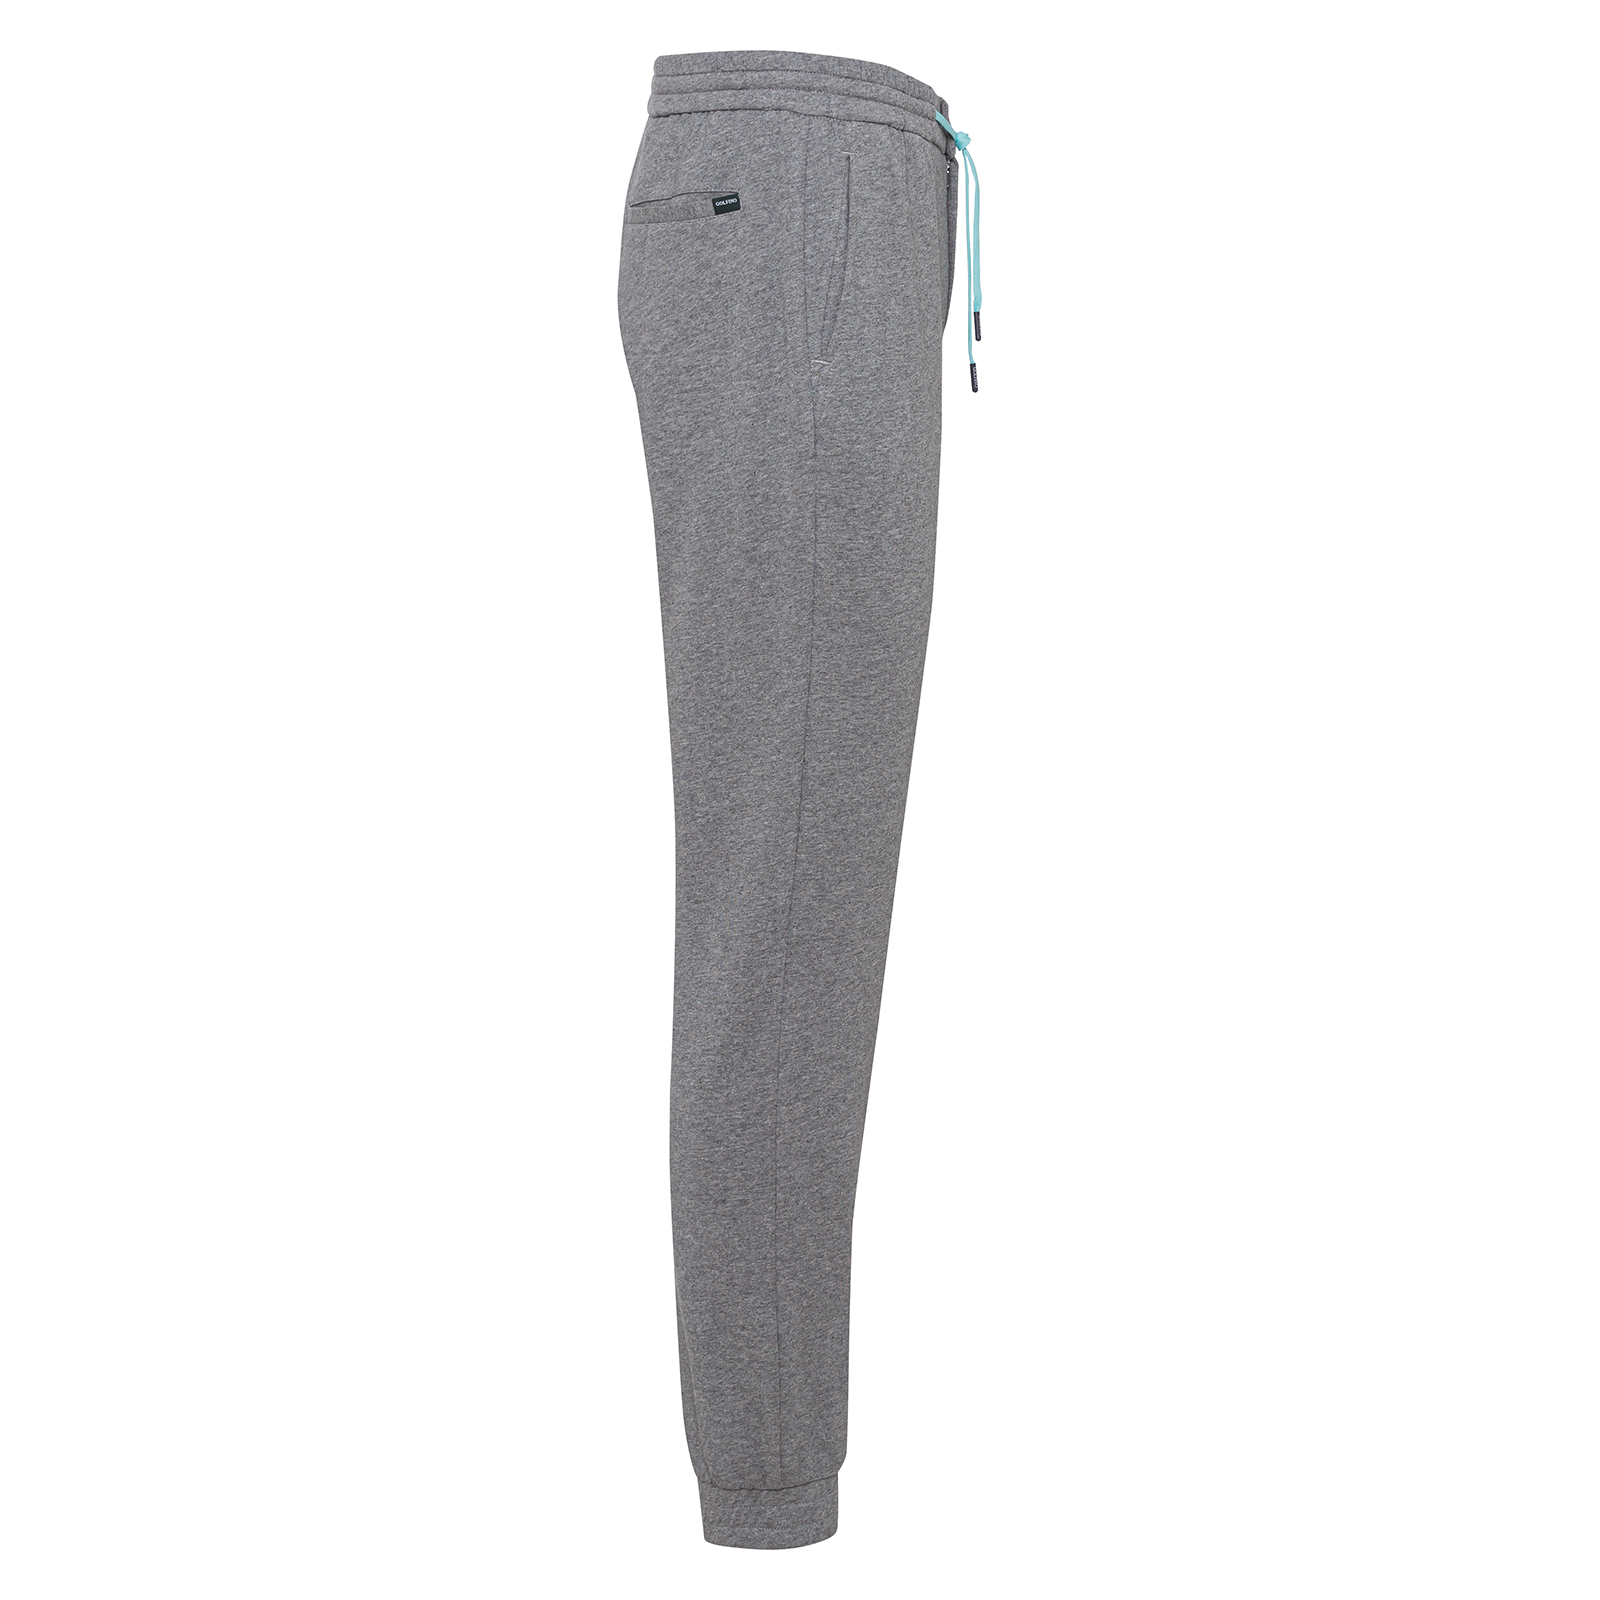 Casual men's trousers made from particularly comfortable cotton fabric